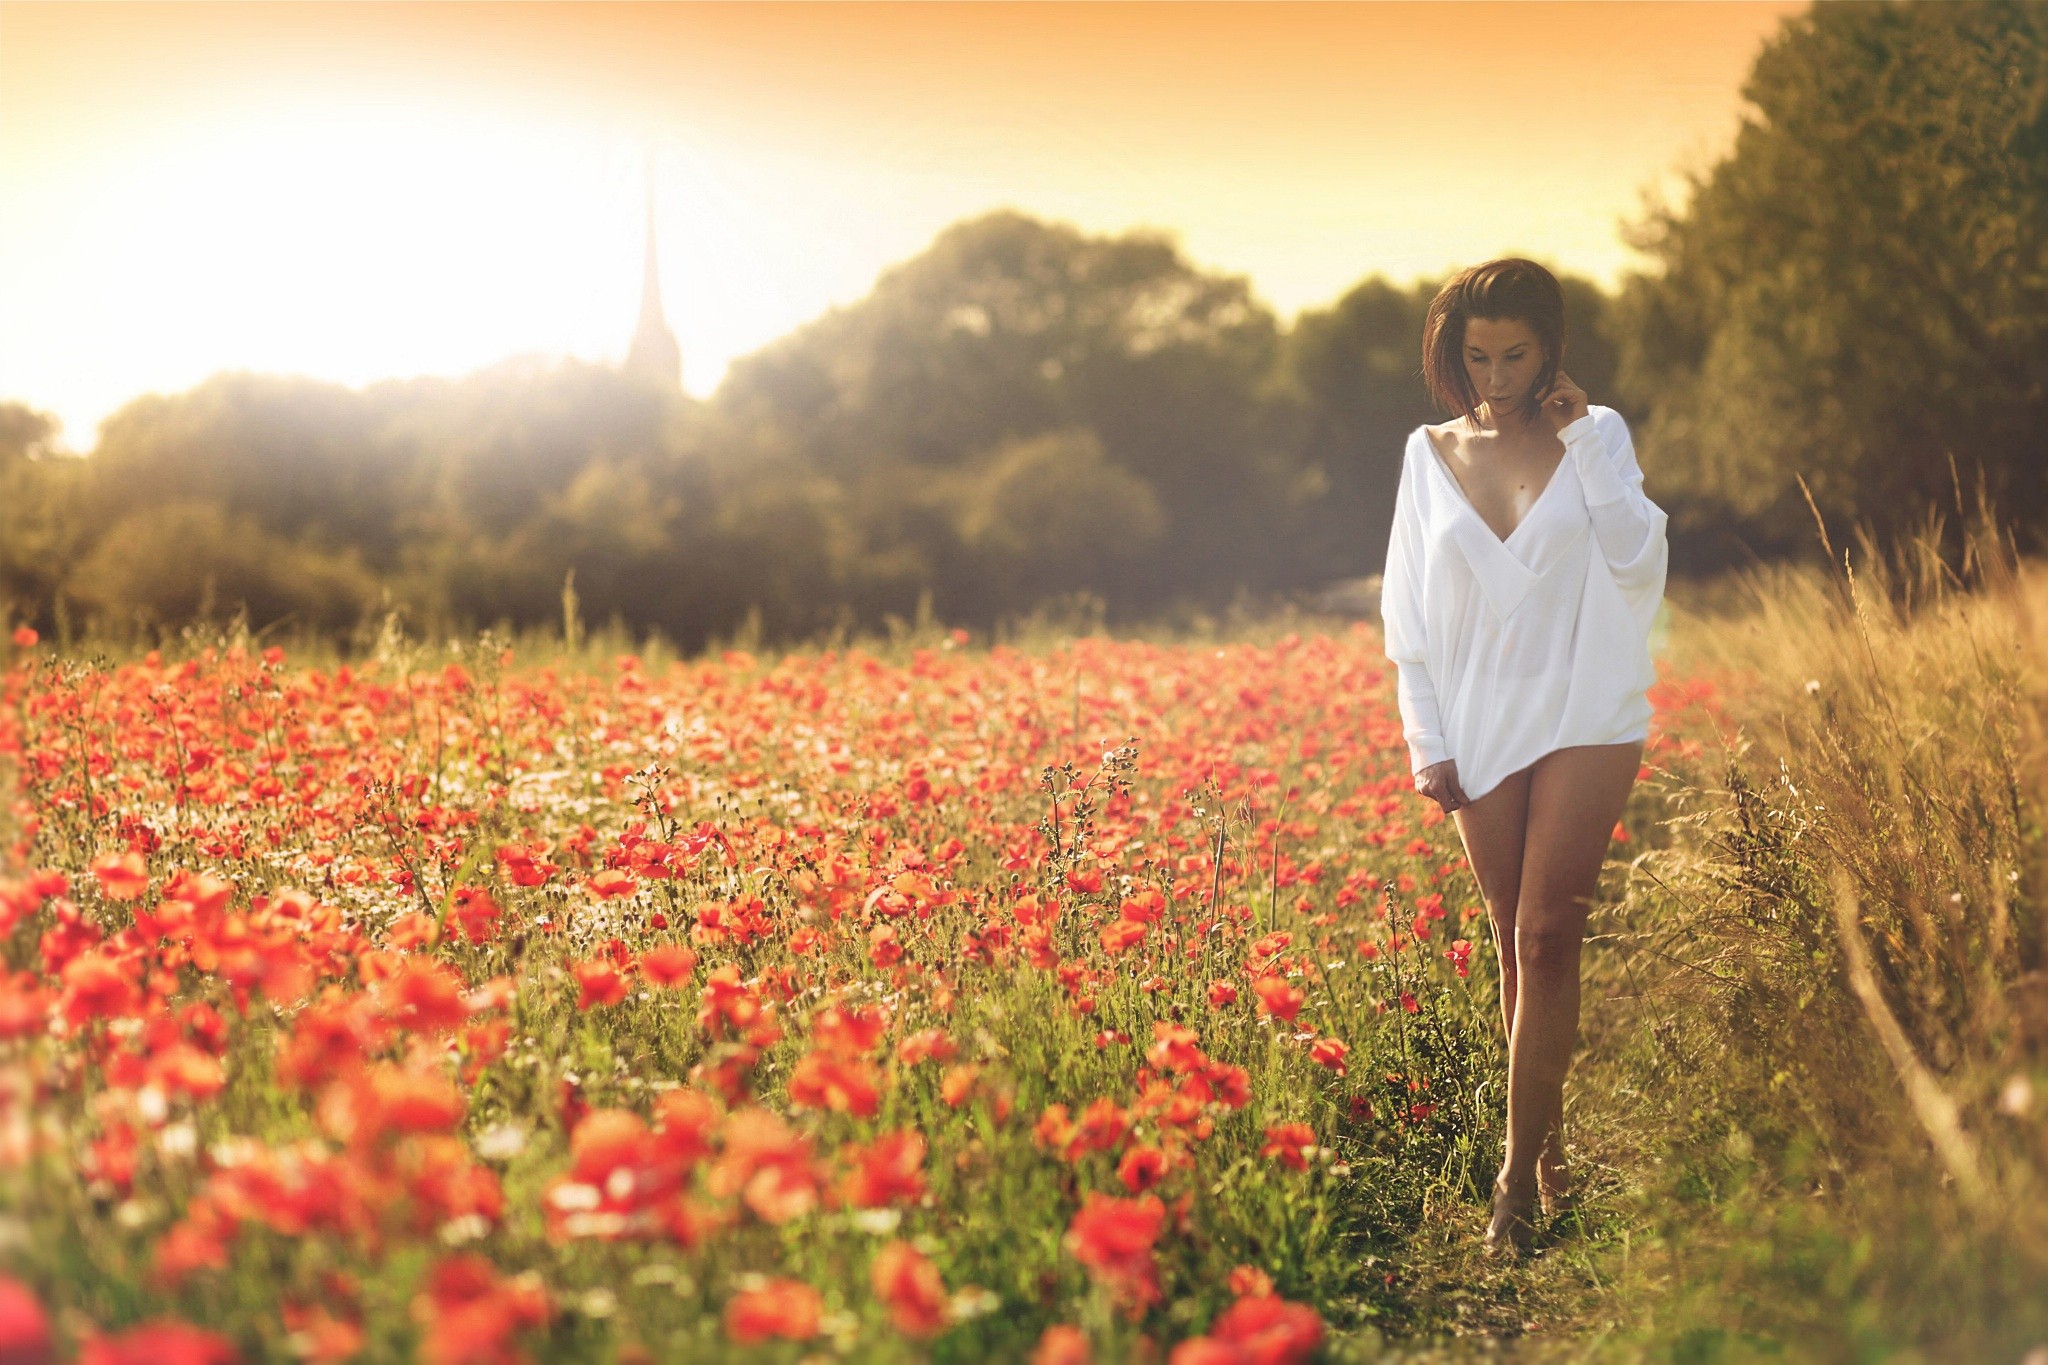 People 2048x1365 women model brunette white clothing women outdoors nature flowers red flowers poppies bottomless field plants partially clothed walking outdoors